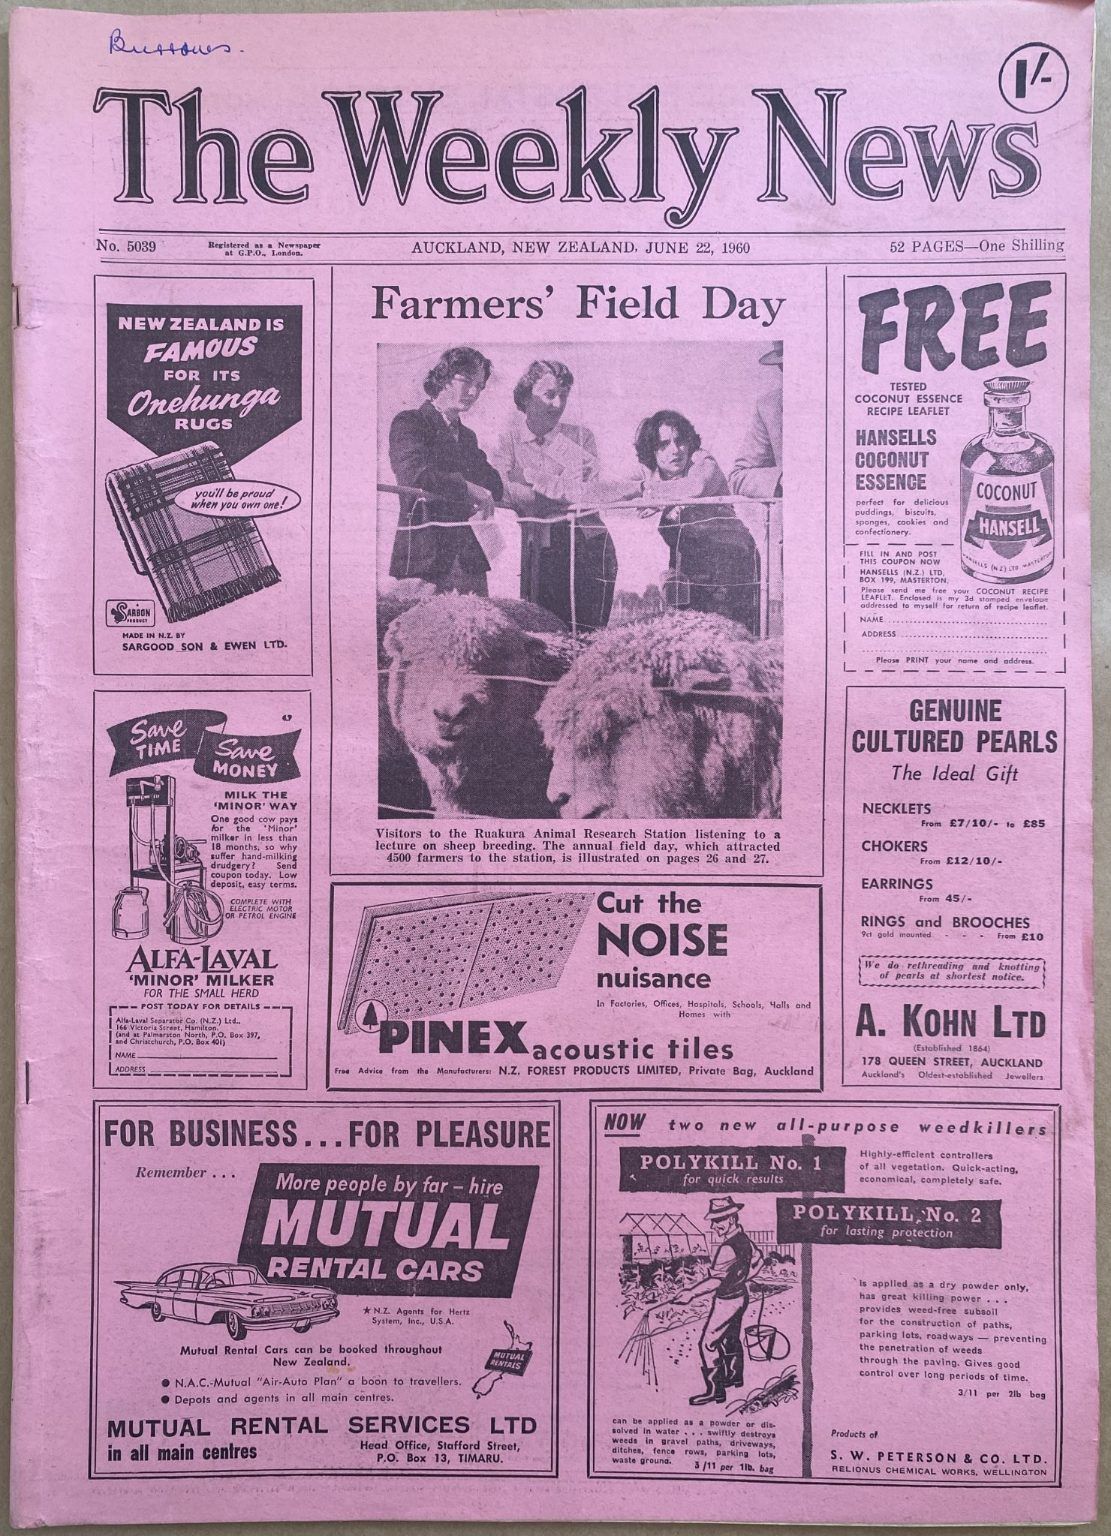 OLD NEWSPAPER: The Weekly News, No. 5039, 22 June 1960